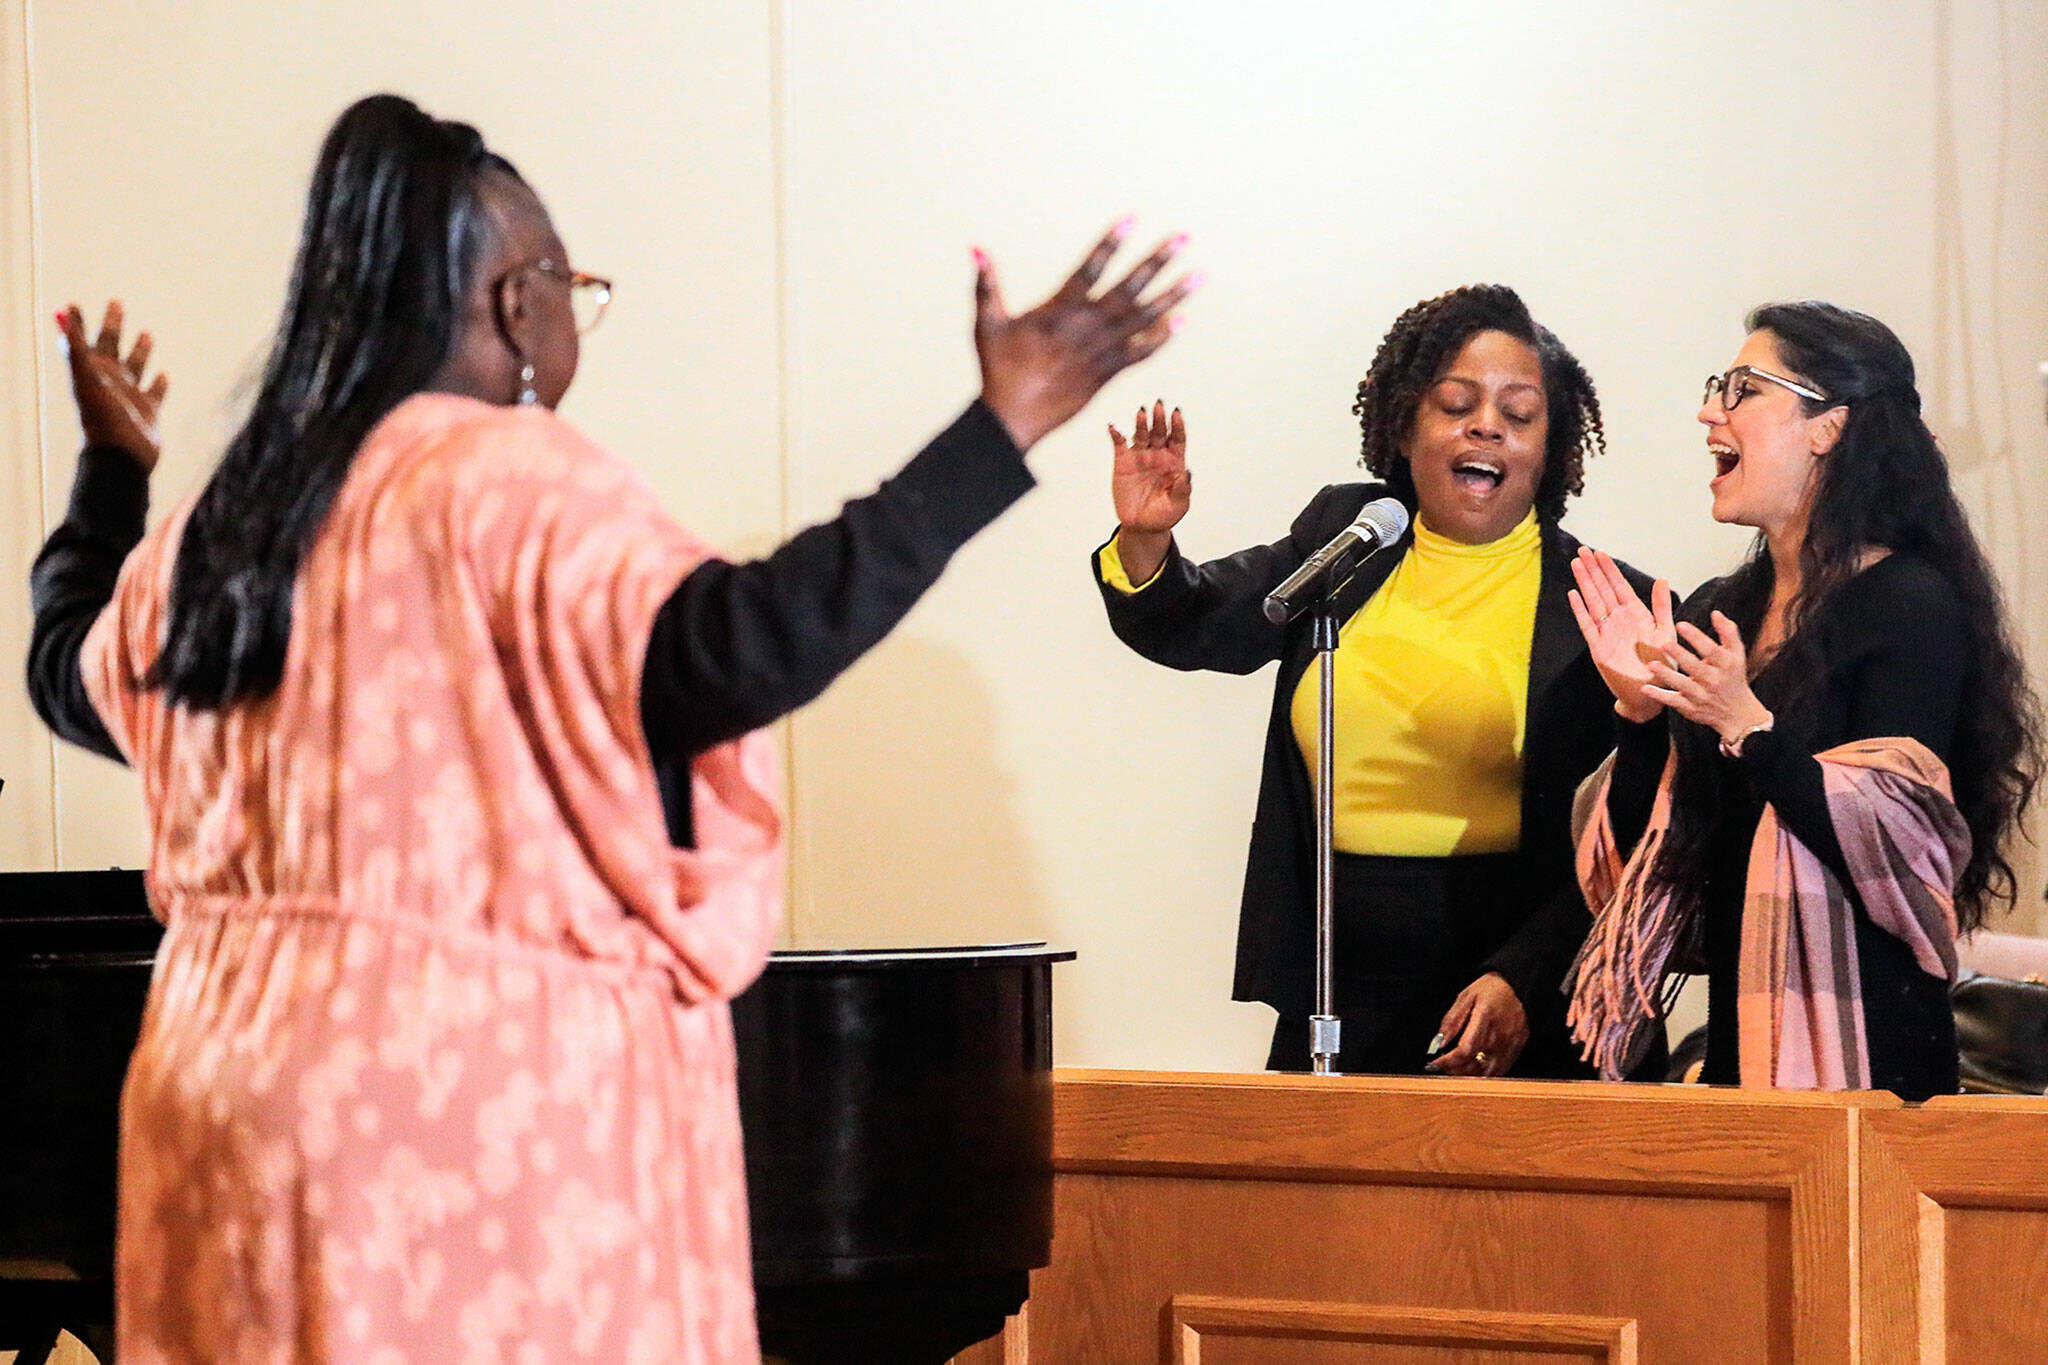 Holley Lacy (left) leads the MLK Celebration Ensemble with Sandra Wright (center) and Maria Caycedo on Sunday afternoon during the Greater Everett Area Rev. Dr. Martin Luther King, Jr. Community Celebration at the First Presbyterian Church of Everett. (Kevin Clark / The Herald)